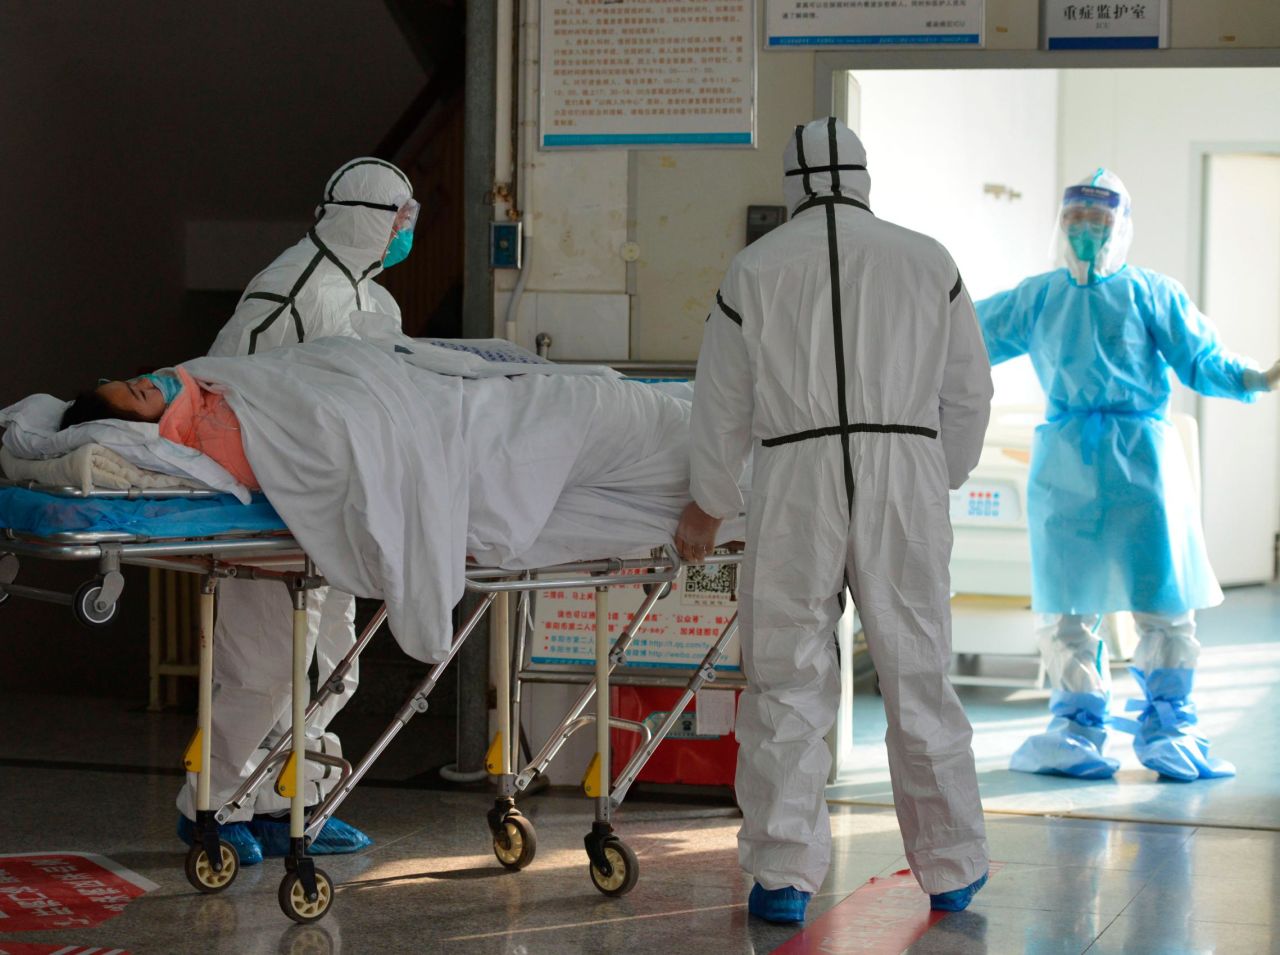 Medical workers move a coronavirus patient into an isolation ward at the Second People's Hospital in Fuyang, China, on February 1.